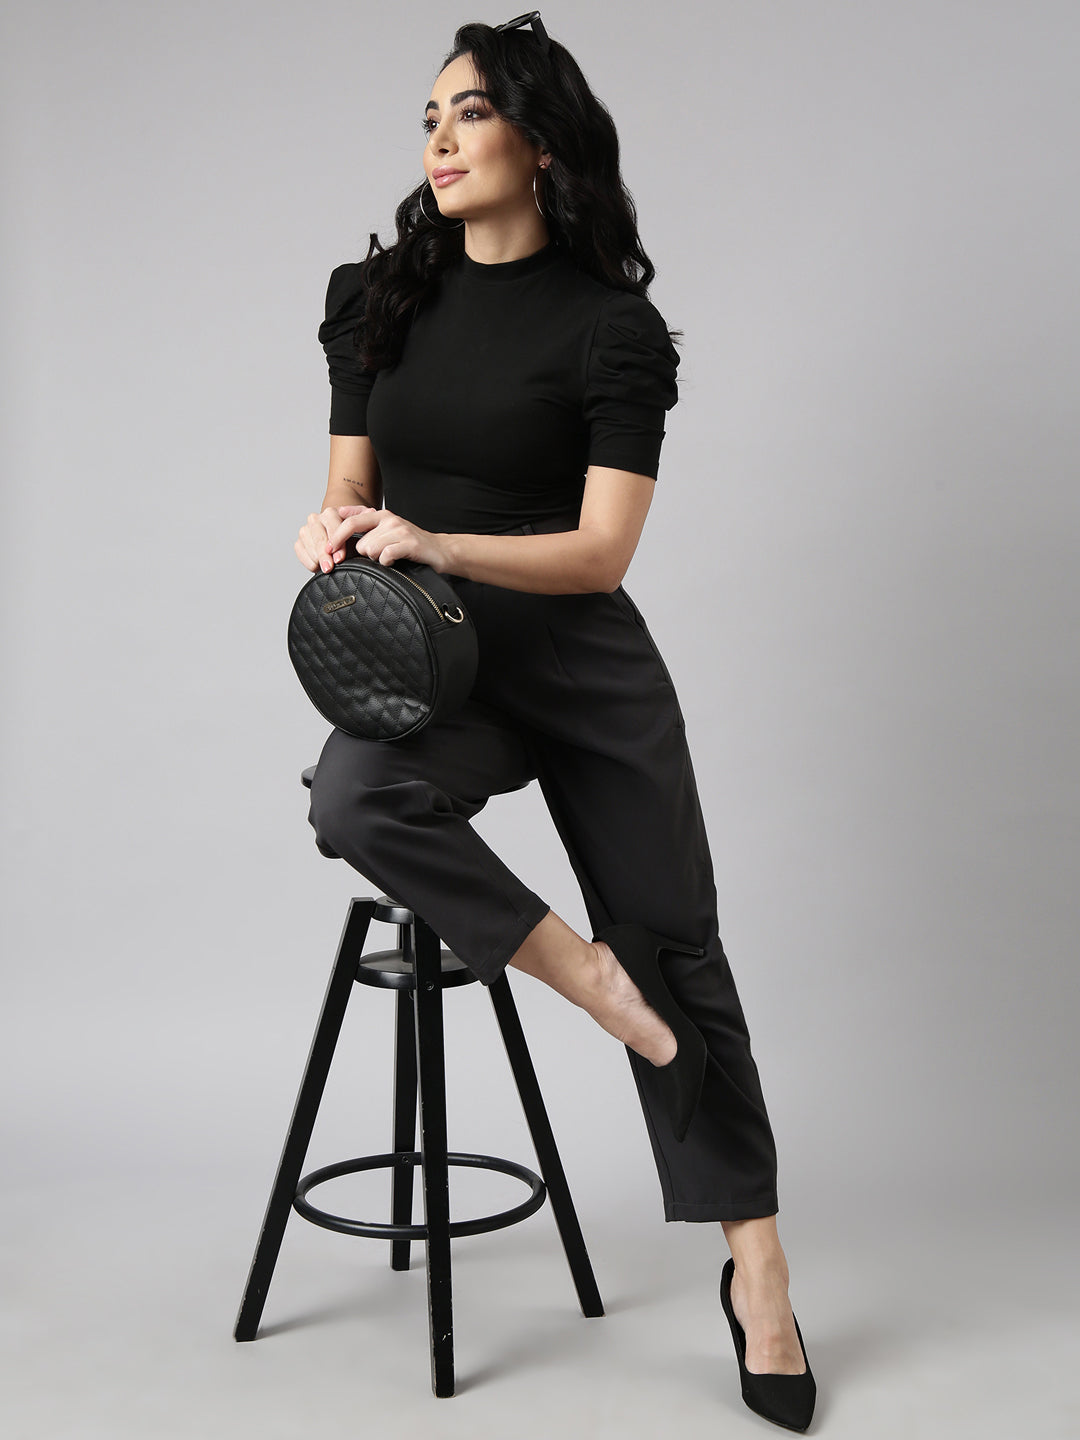 Women Solid Charcoal Formal Trousers